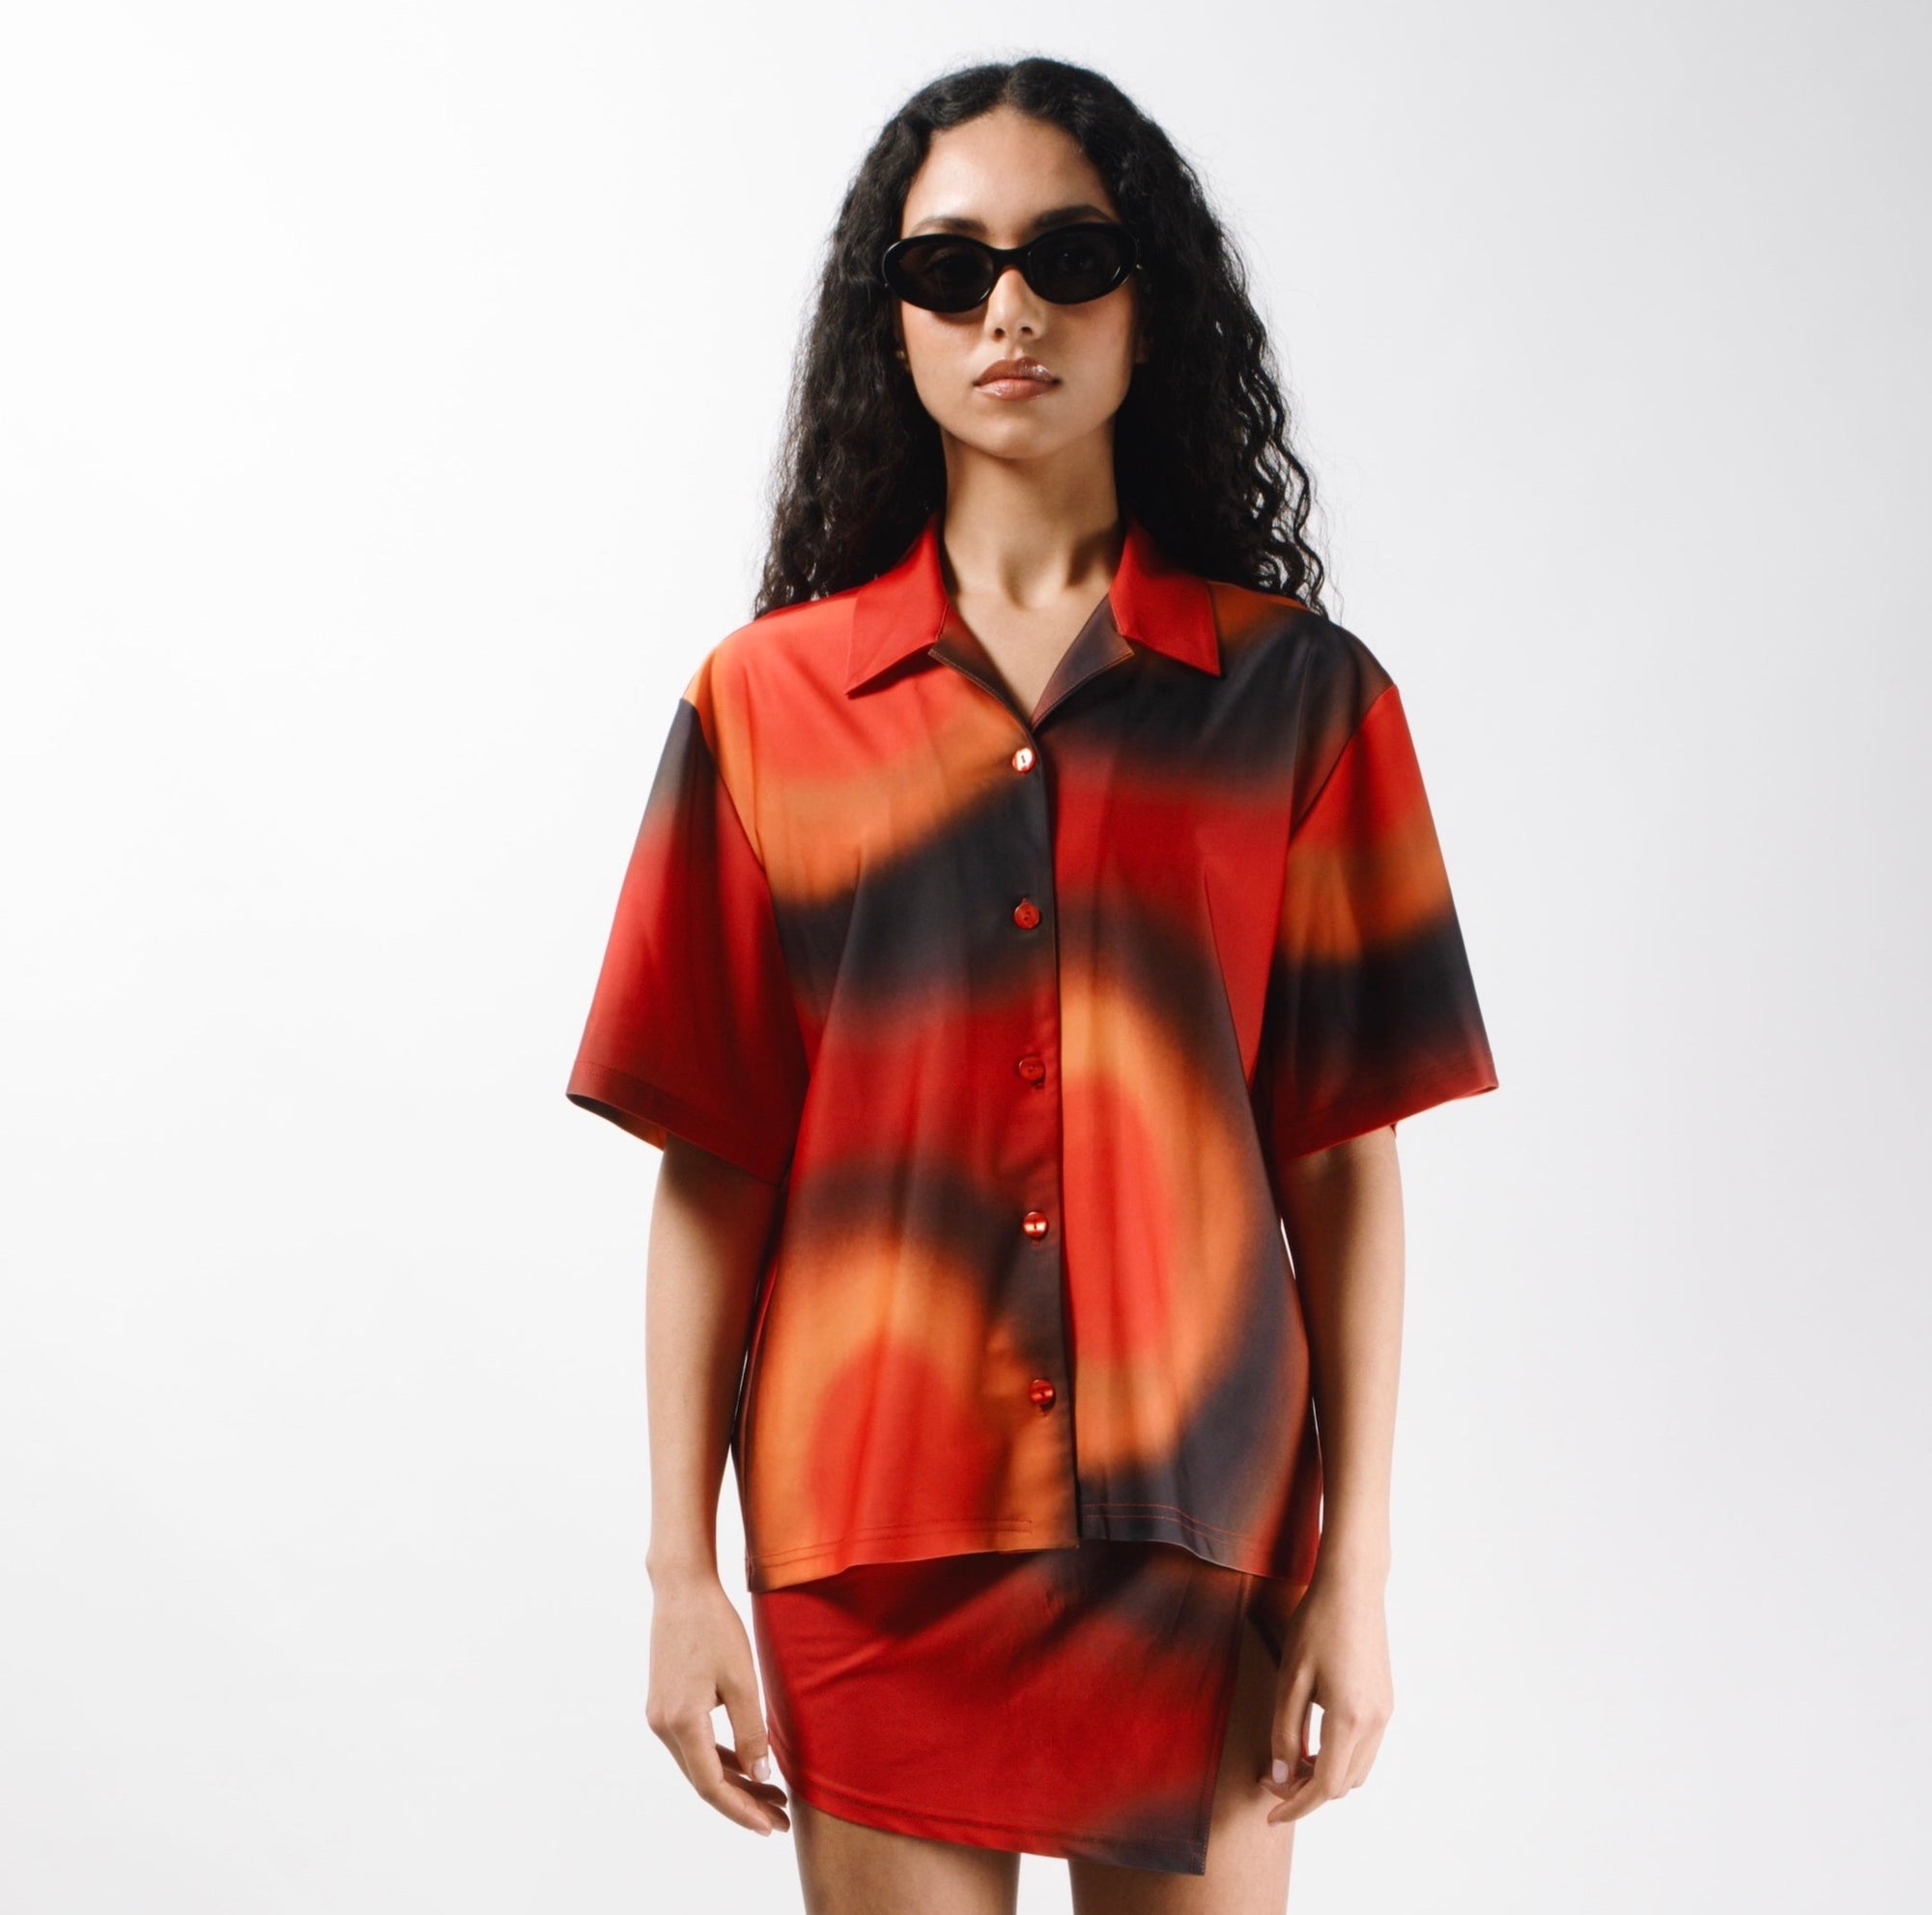 Short sleeve, button up shirt in red printed jersey made from recycled plastic bottles. Oversized silhouette with a relaxed neckline - front